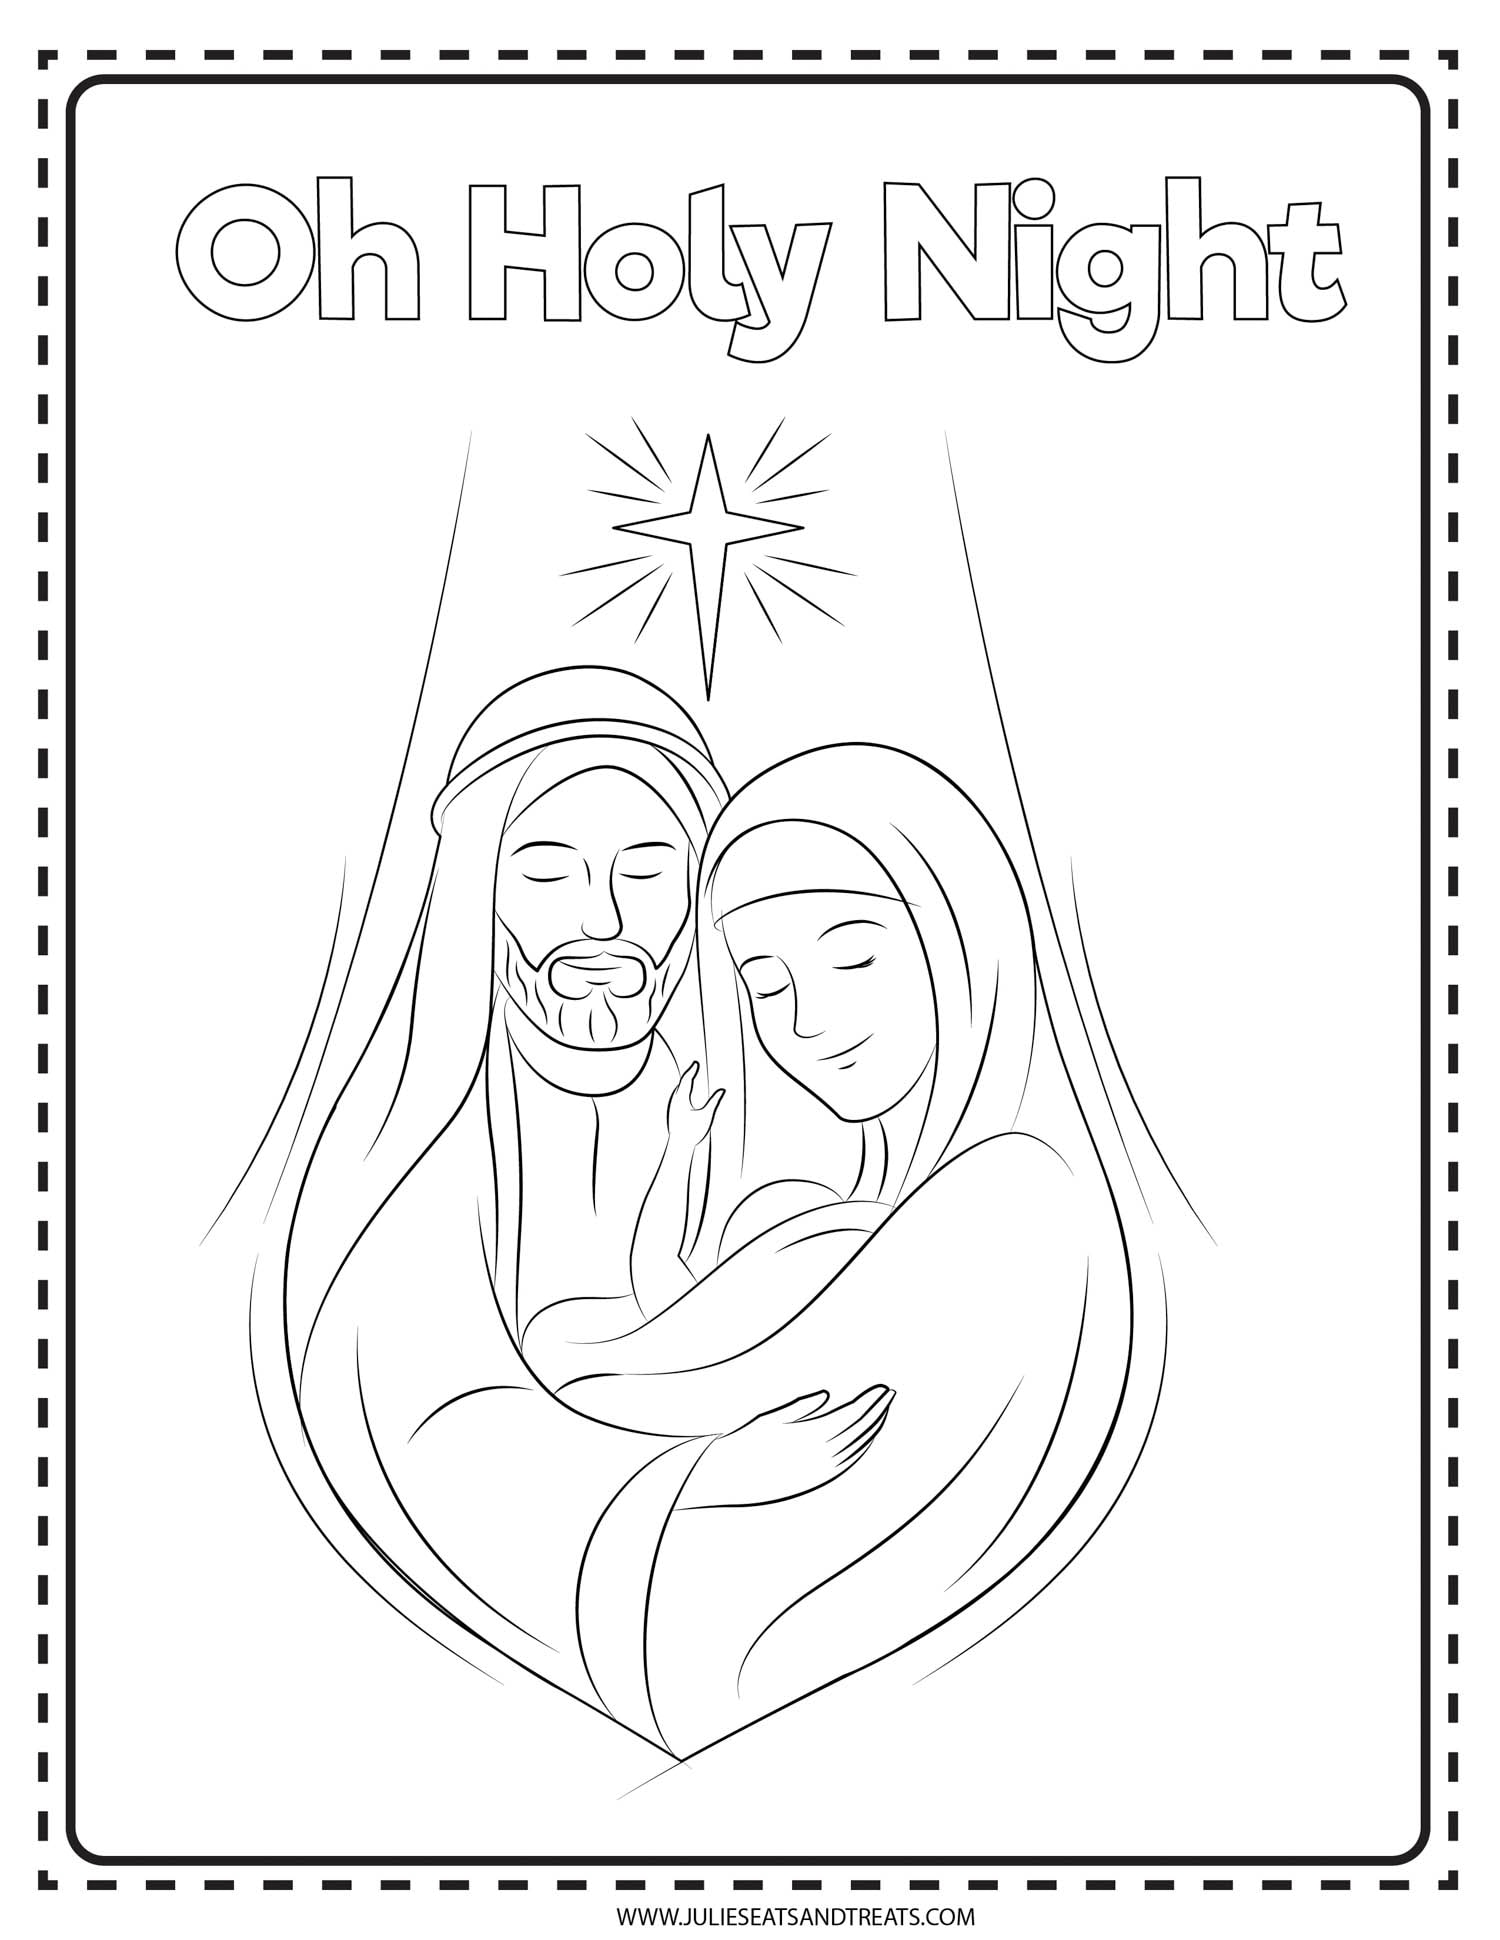 Oh Holy Night Coloring Printable